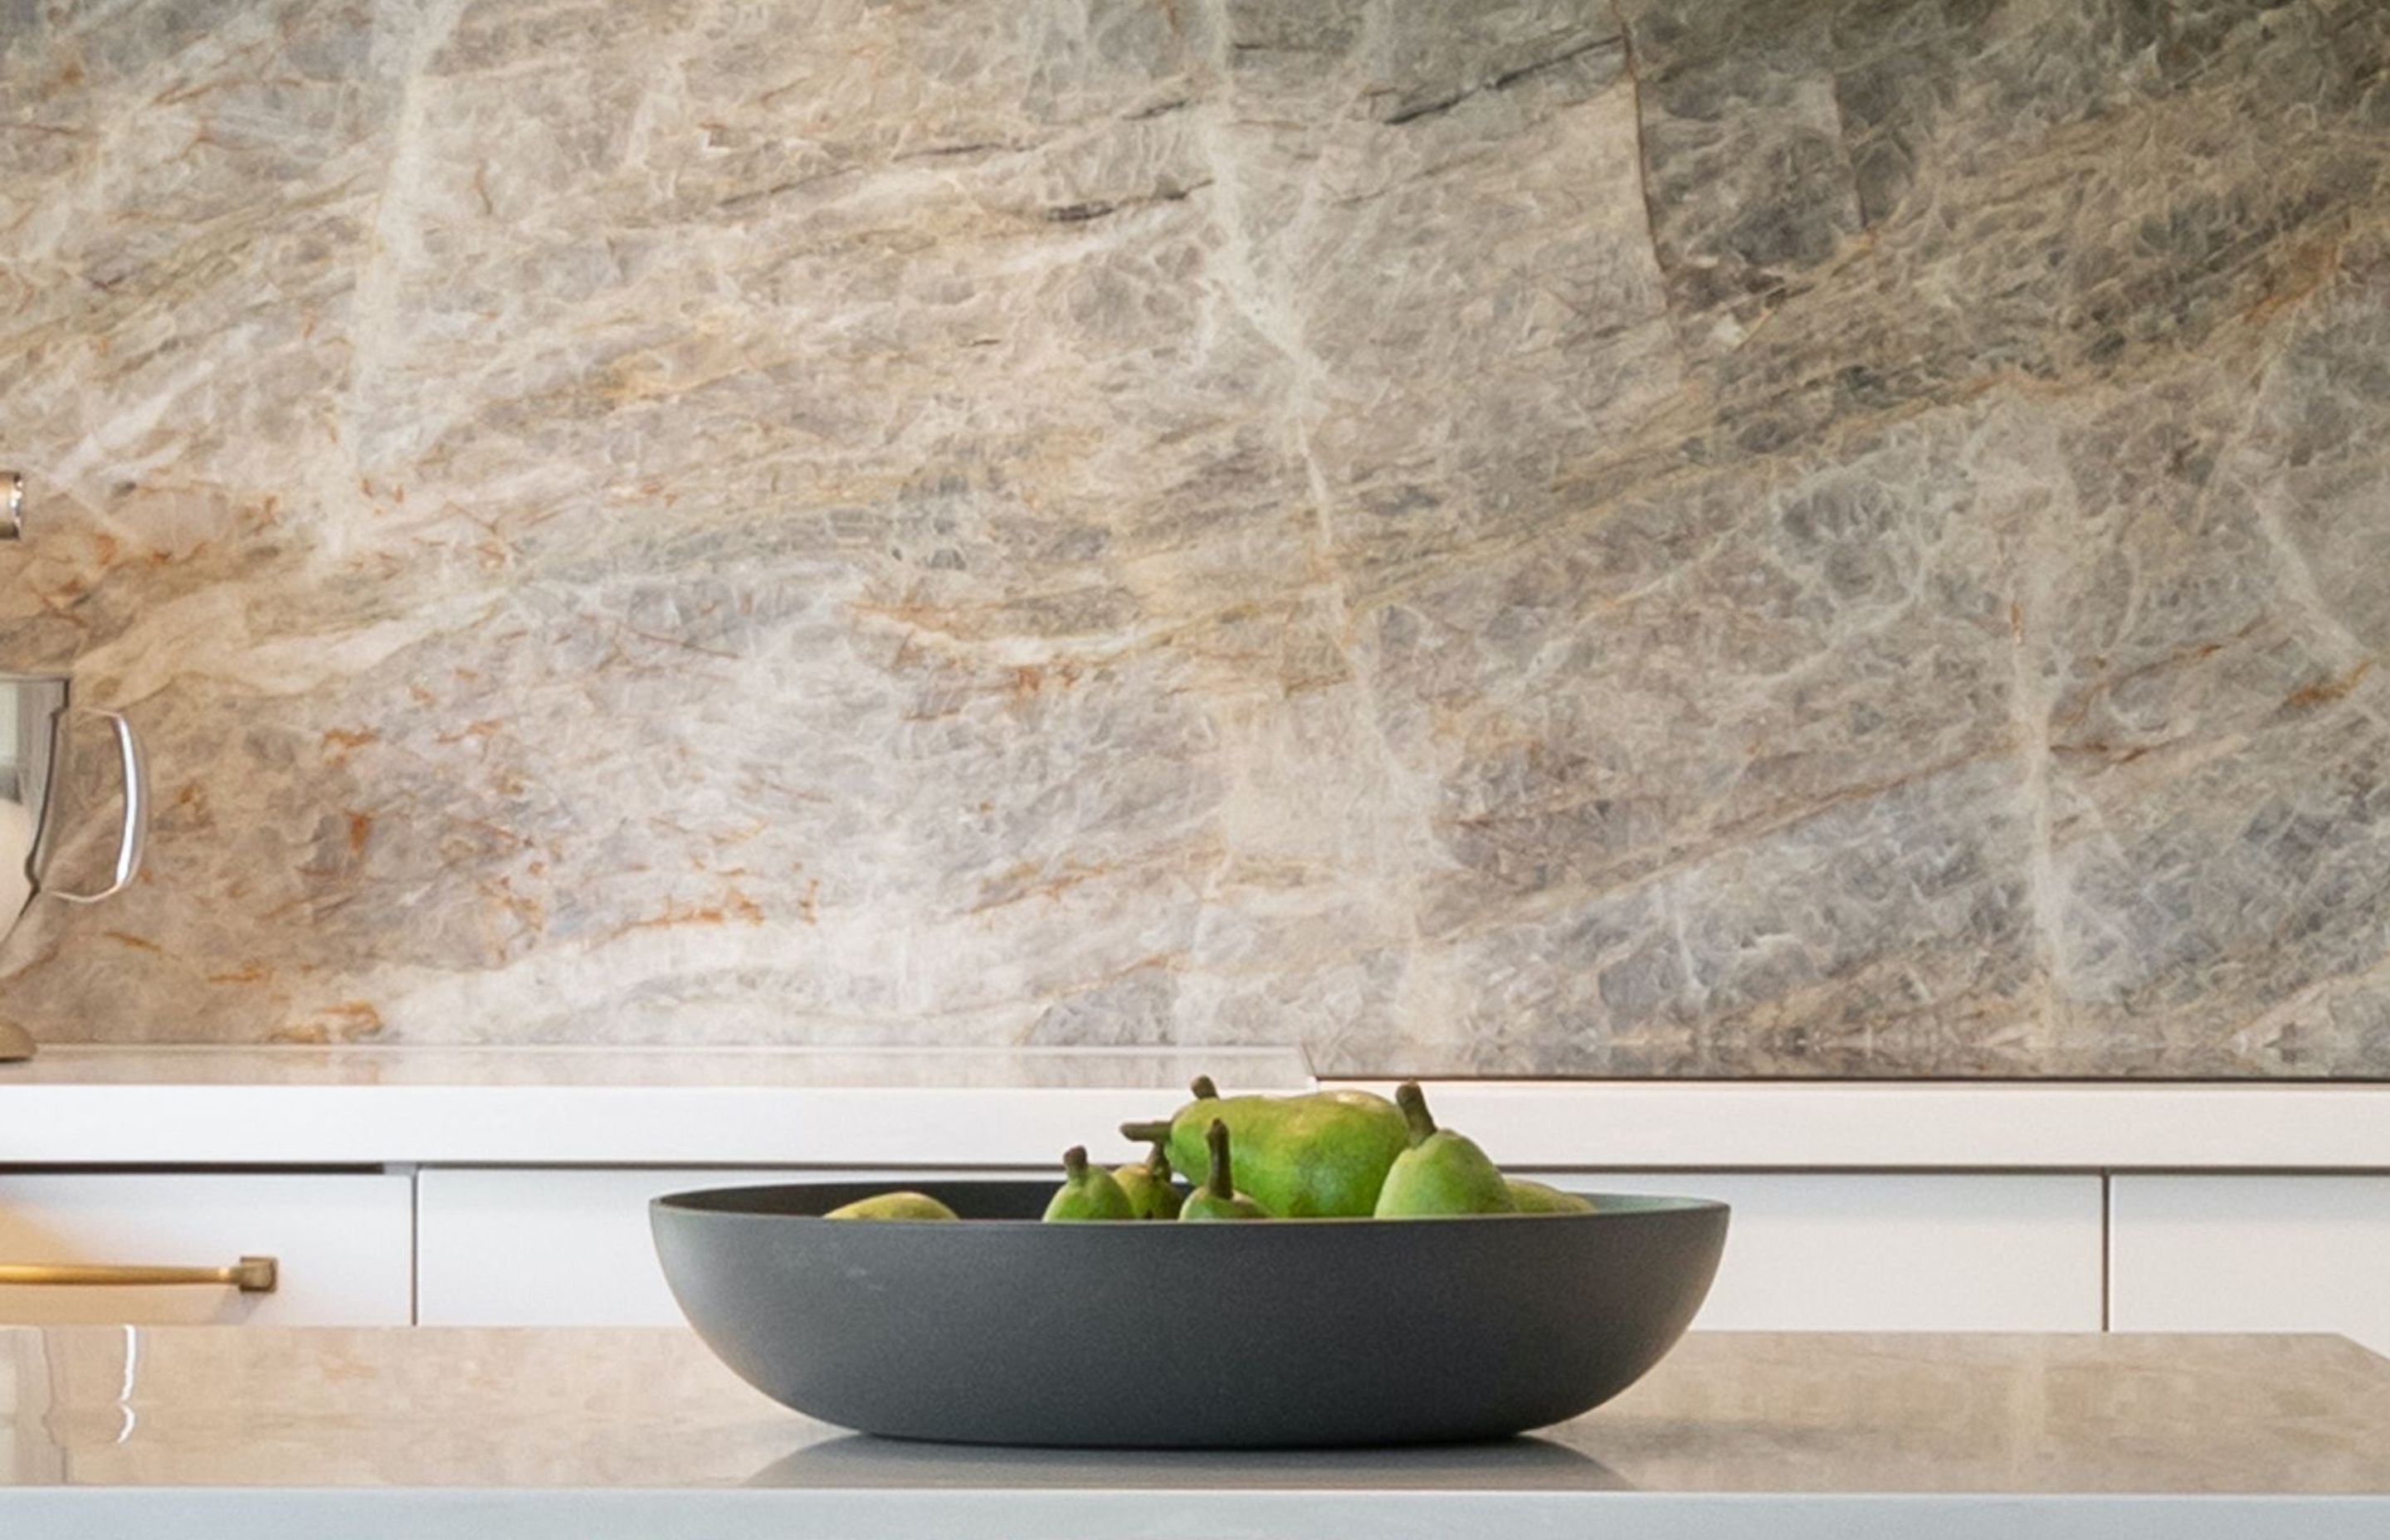 A beauty of nature itself, the stunning “Cielo” quartzite wall treatment draws the eye into its beautiful rich texture and colours. These colours inspire the kitchen’s aesthetics with contrasting dark &amp; light cabinetry and echos of gold. 